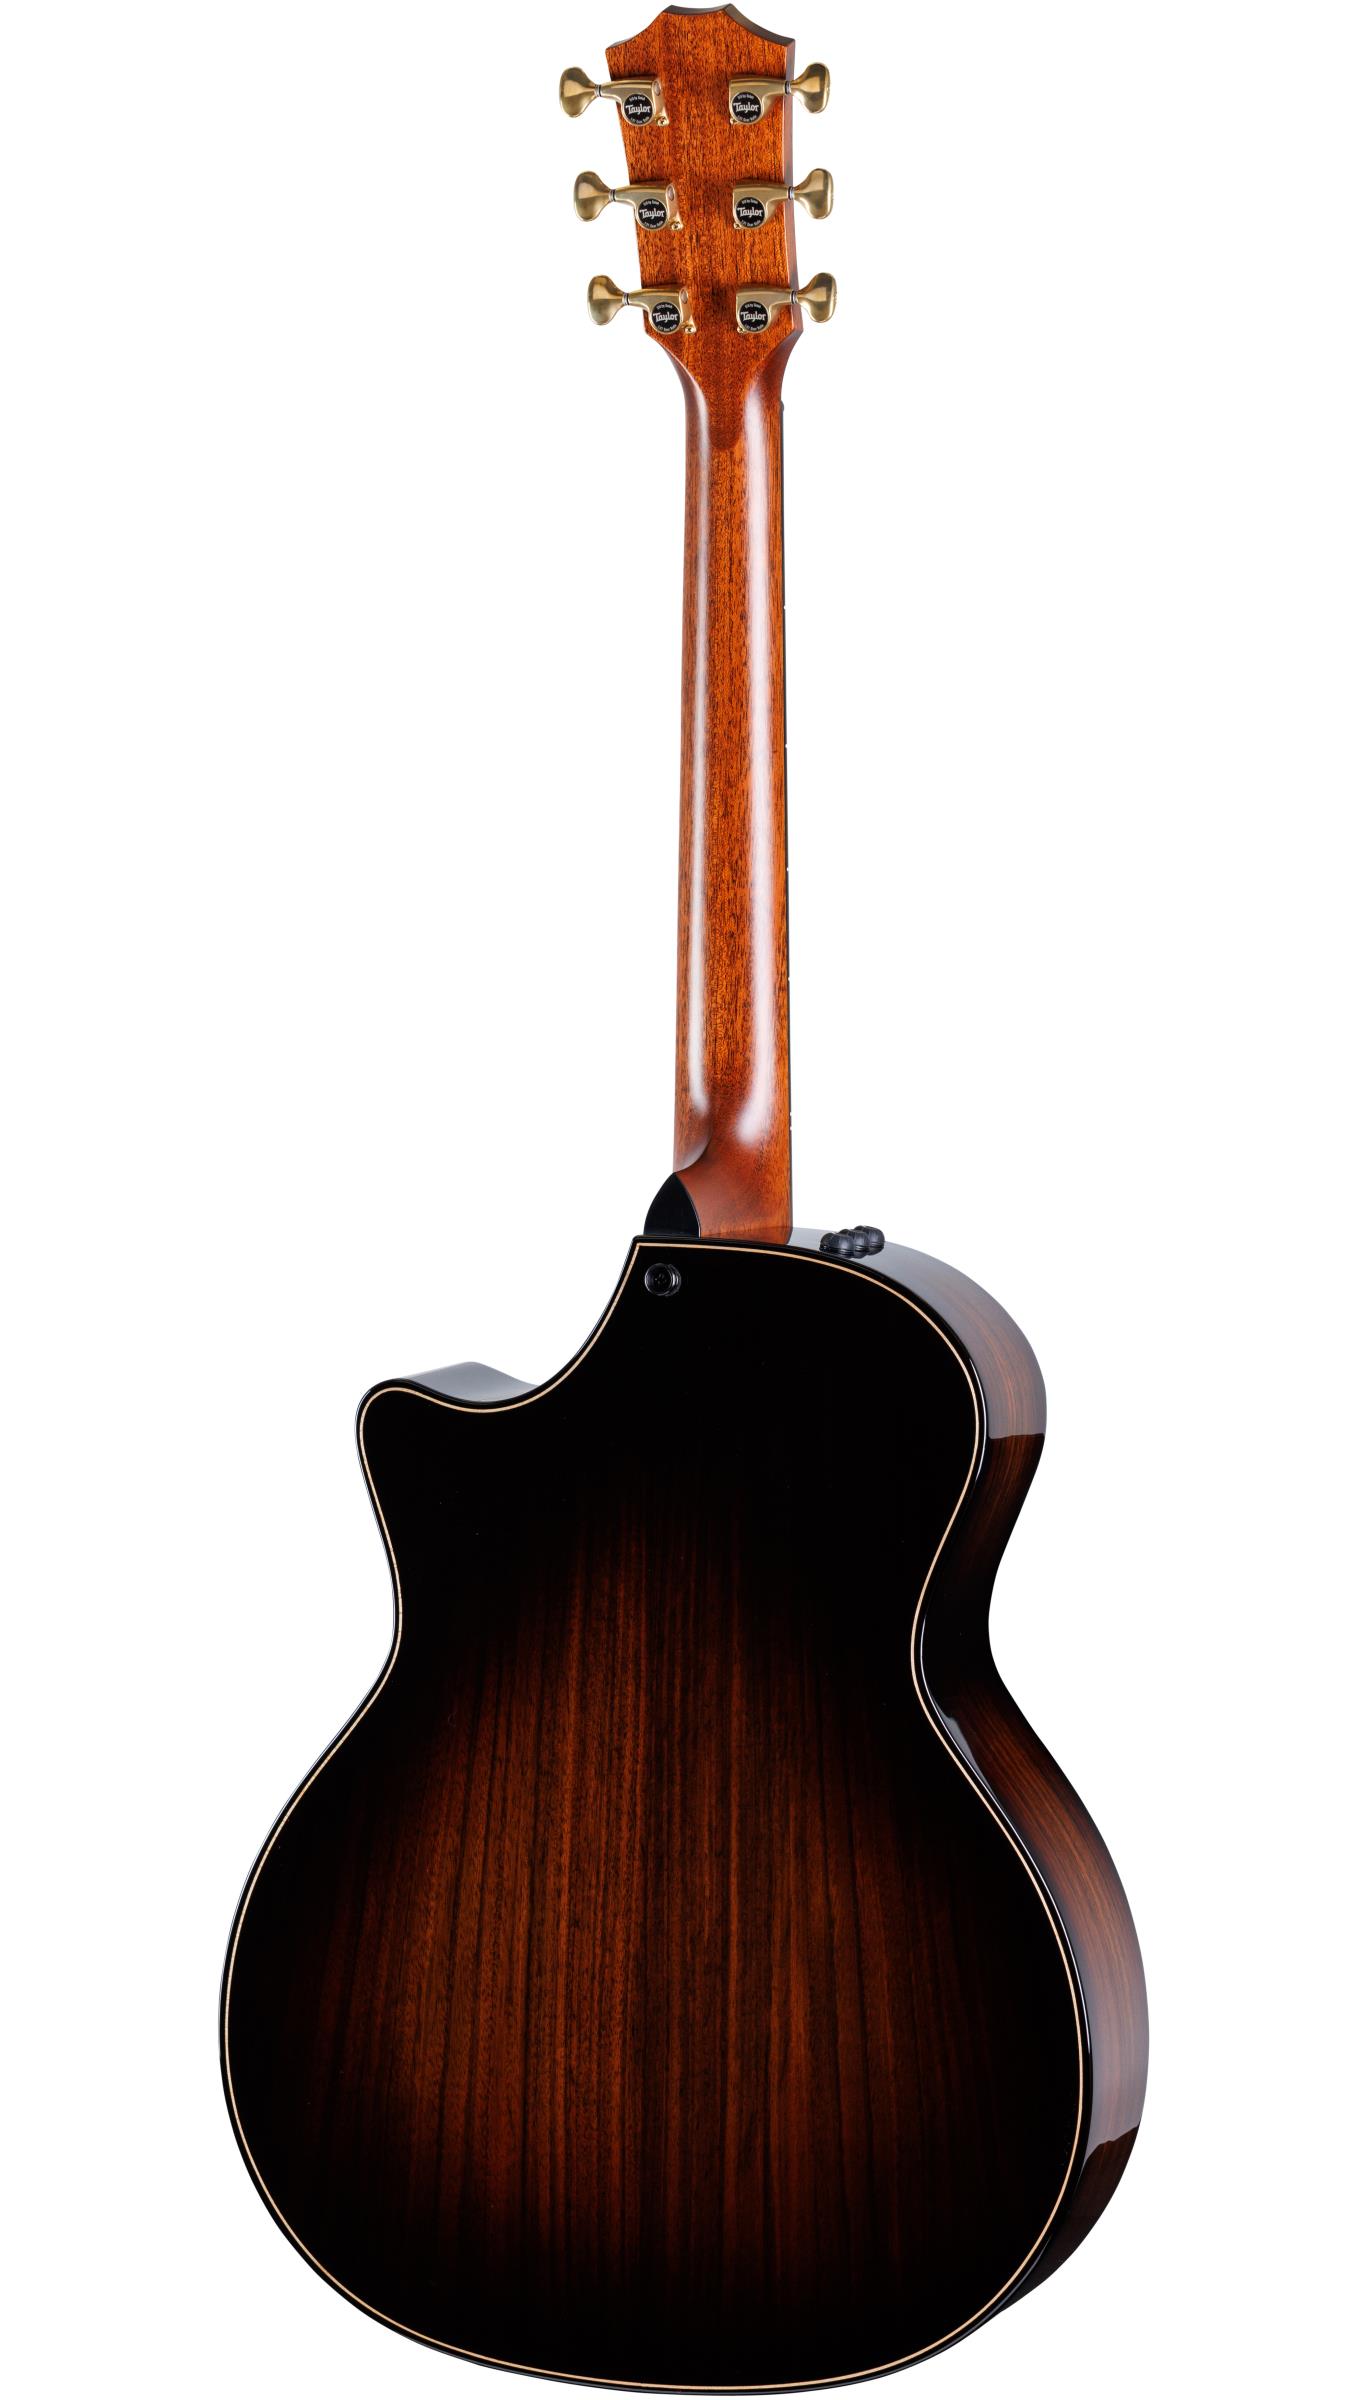 TAYLOR Builder's Edition 814ce 50th Anniversary